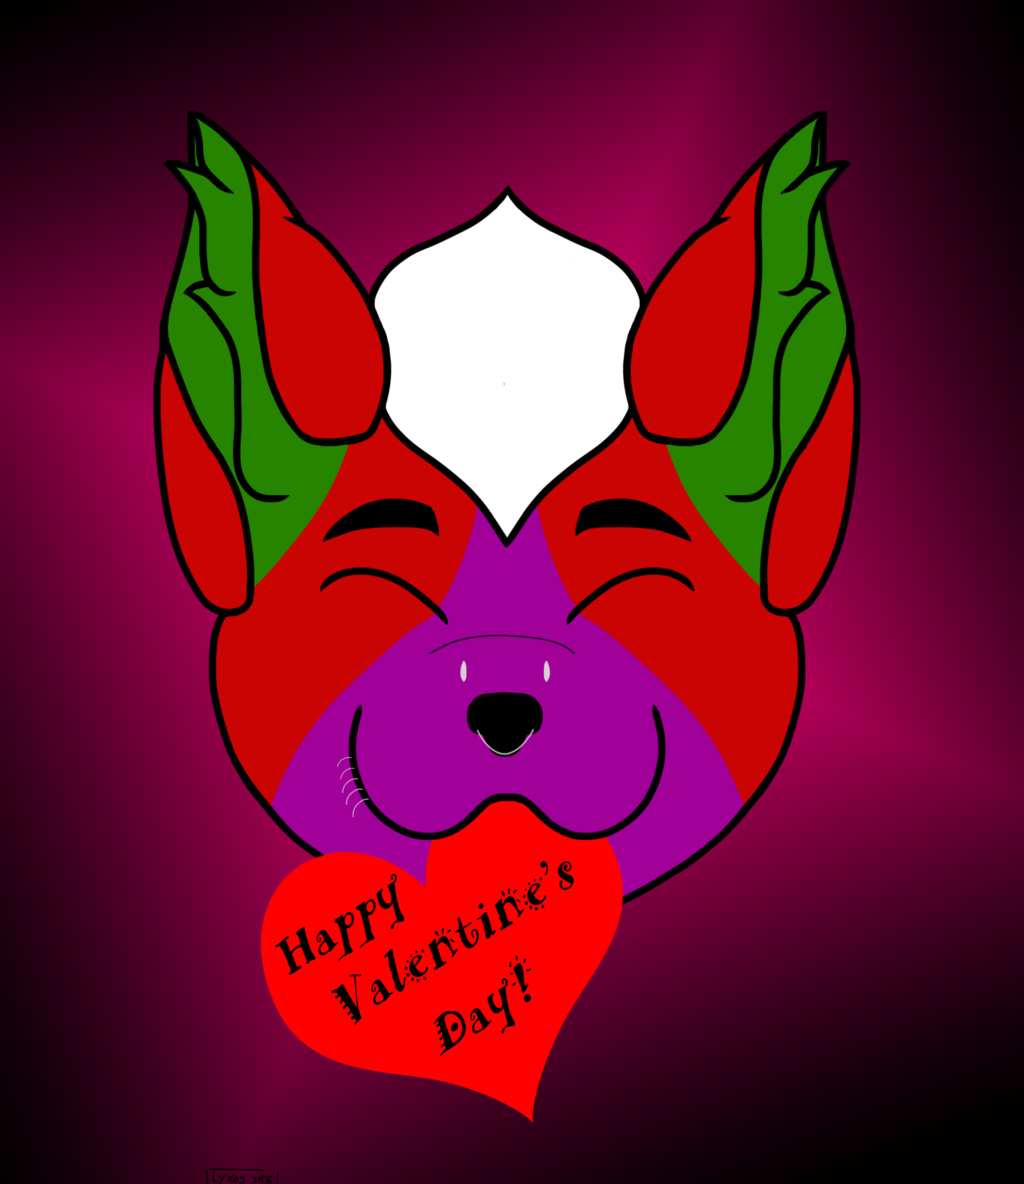 Most recent image: Happy Valentine's Day from MCRemix~